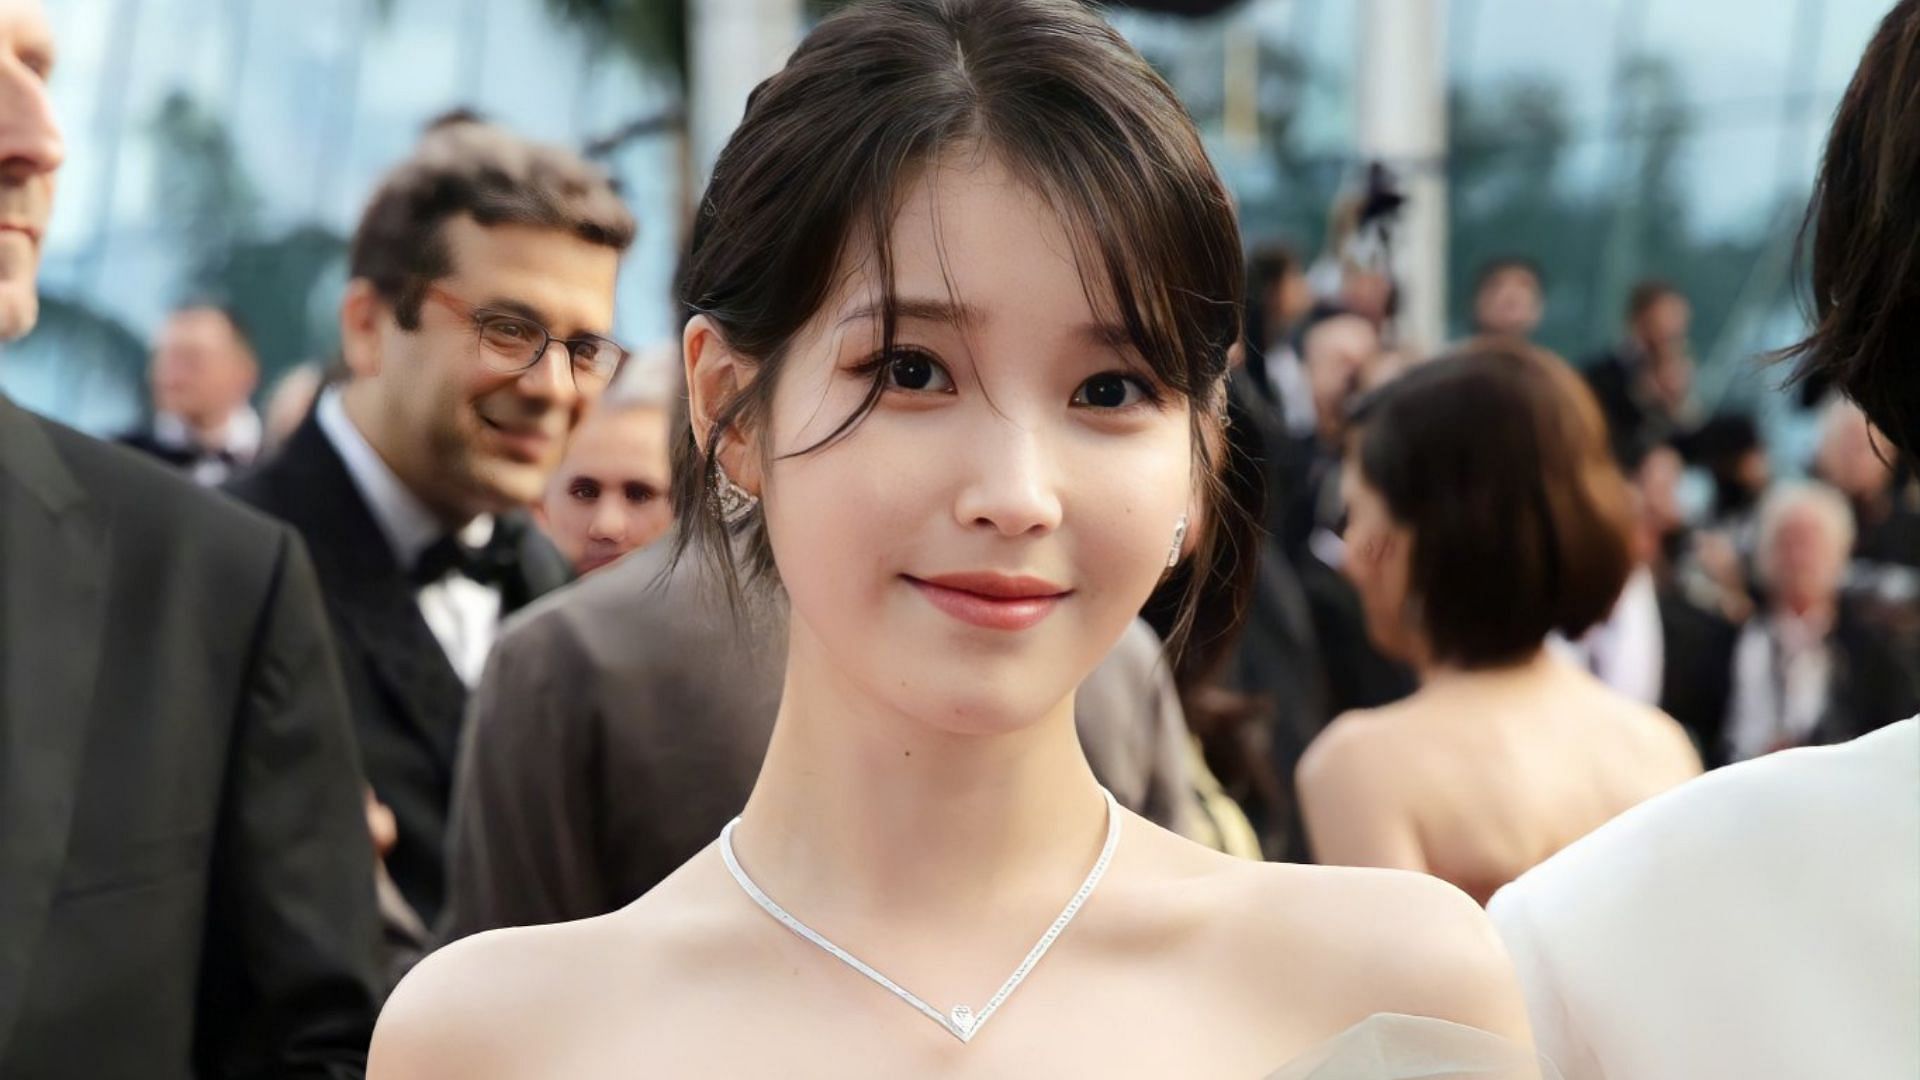 K-pop idol and actress IU at the Cannes Film Festival (Image via Getty)